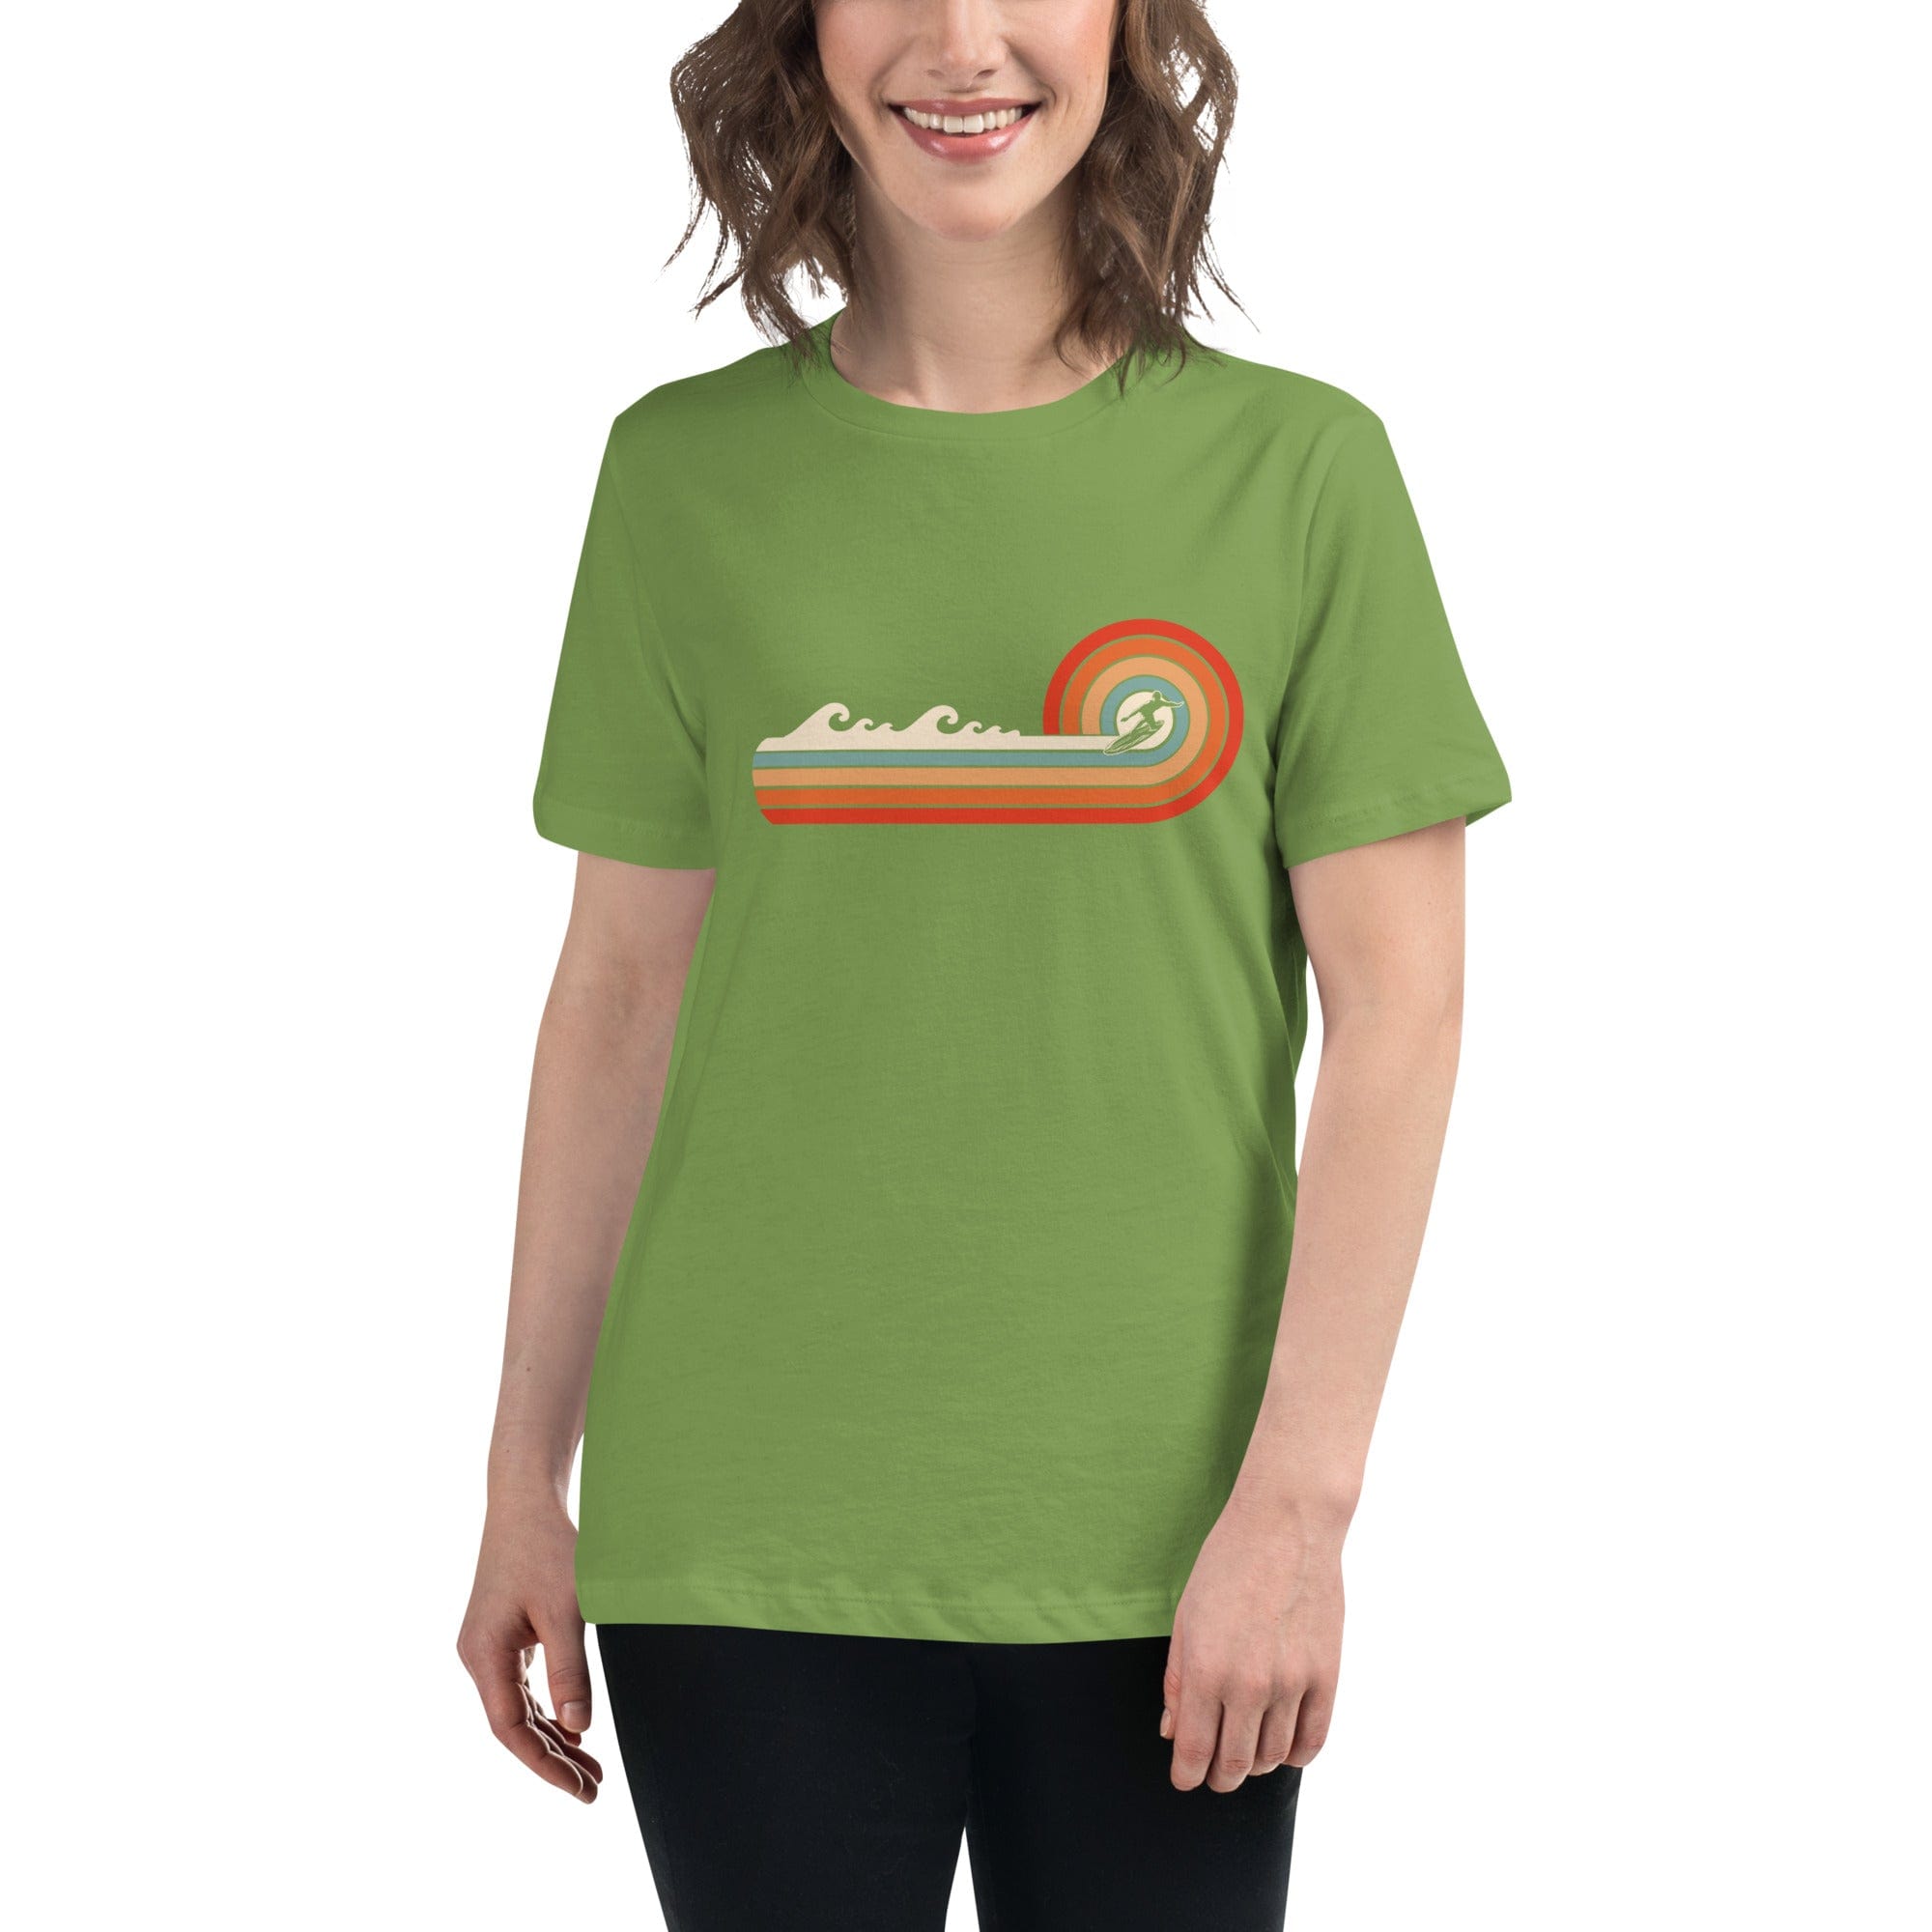 Spruced Roost Leaf / S Surfs Up - Women's Relaxed T-Shirt - S-3XL